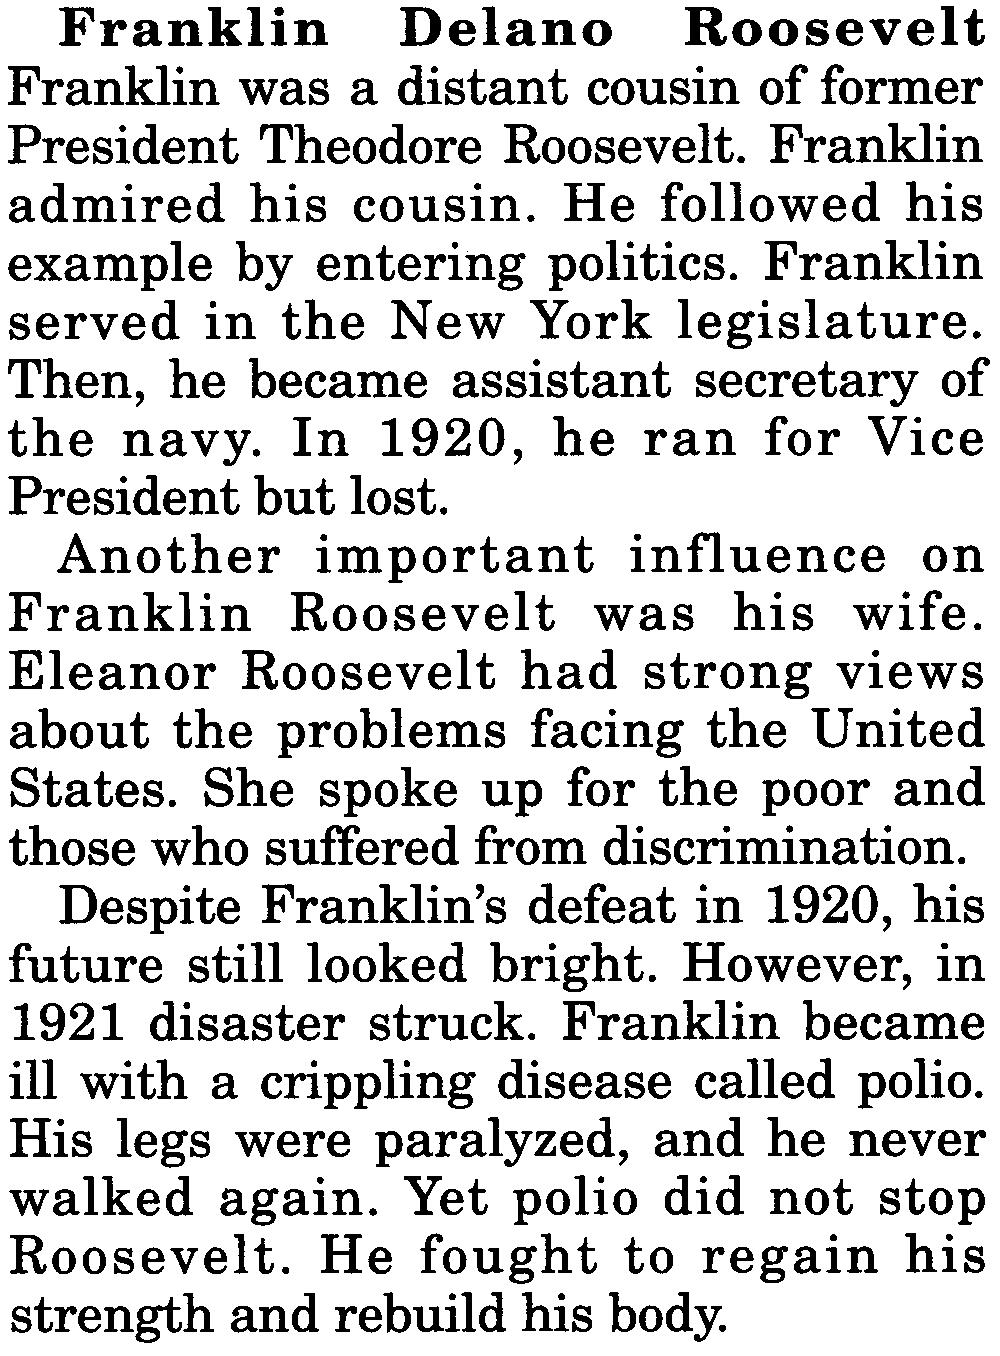 'What steps did Pioesident Roosevelt take to end the Depression? Franklin Delano Roosevelt came from a wealthy New York family. He went to an expensive private school and then to Harvard University.